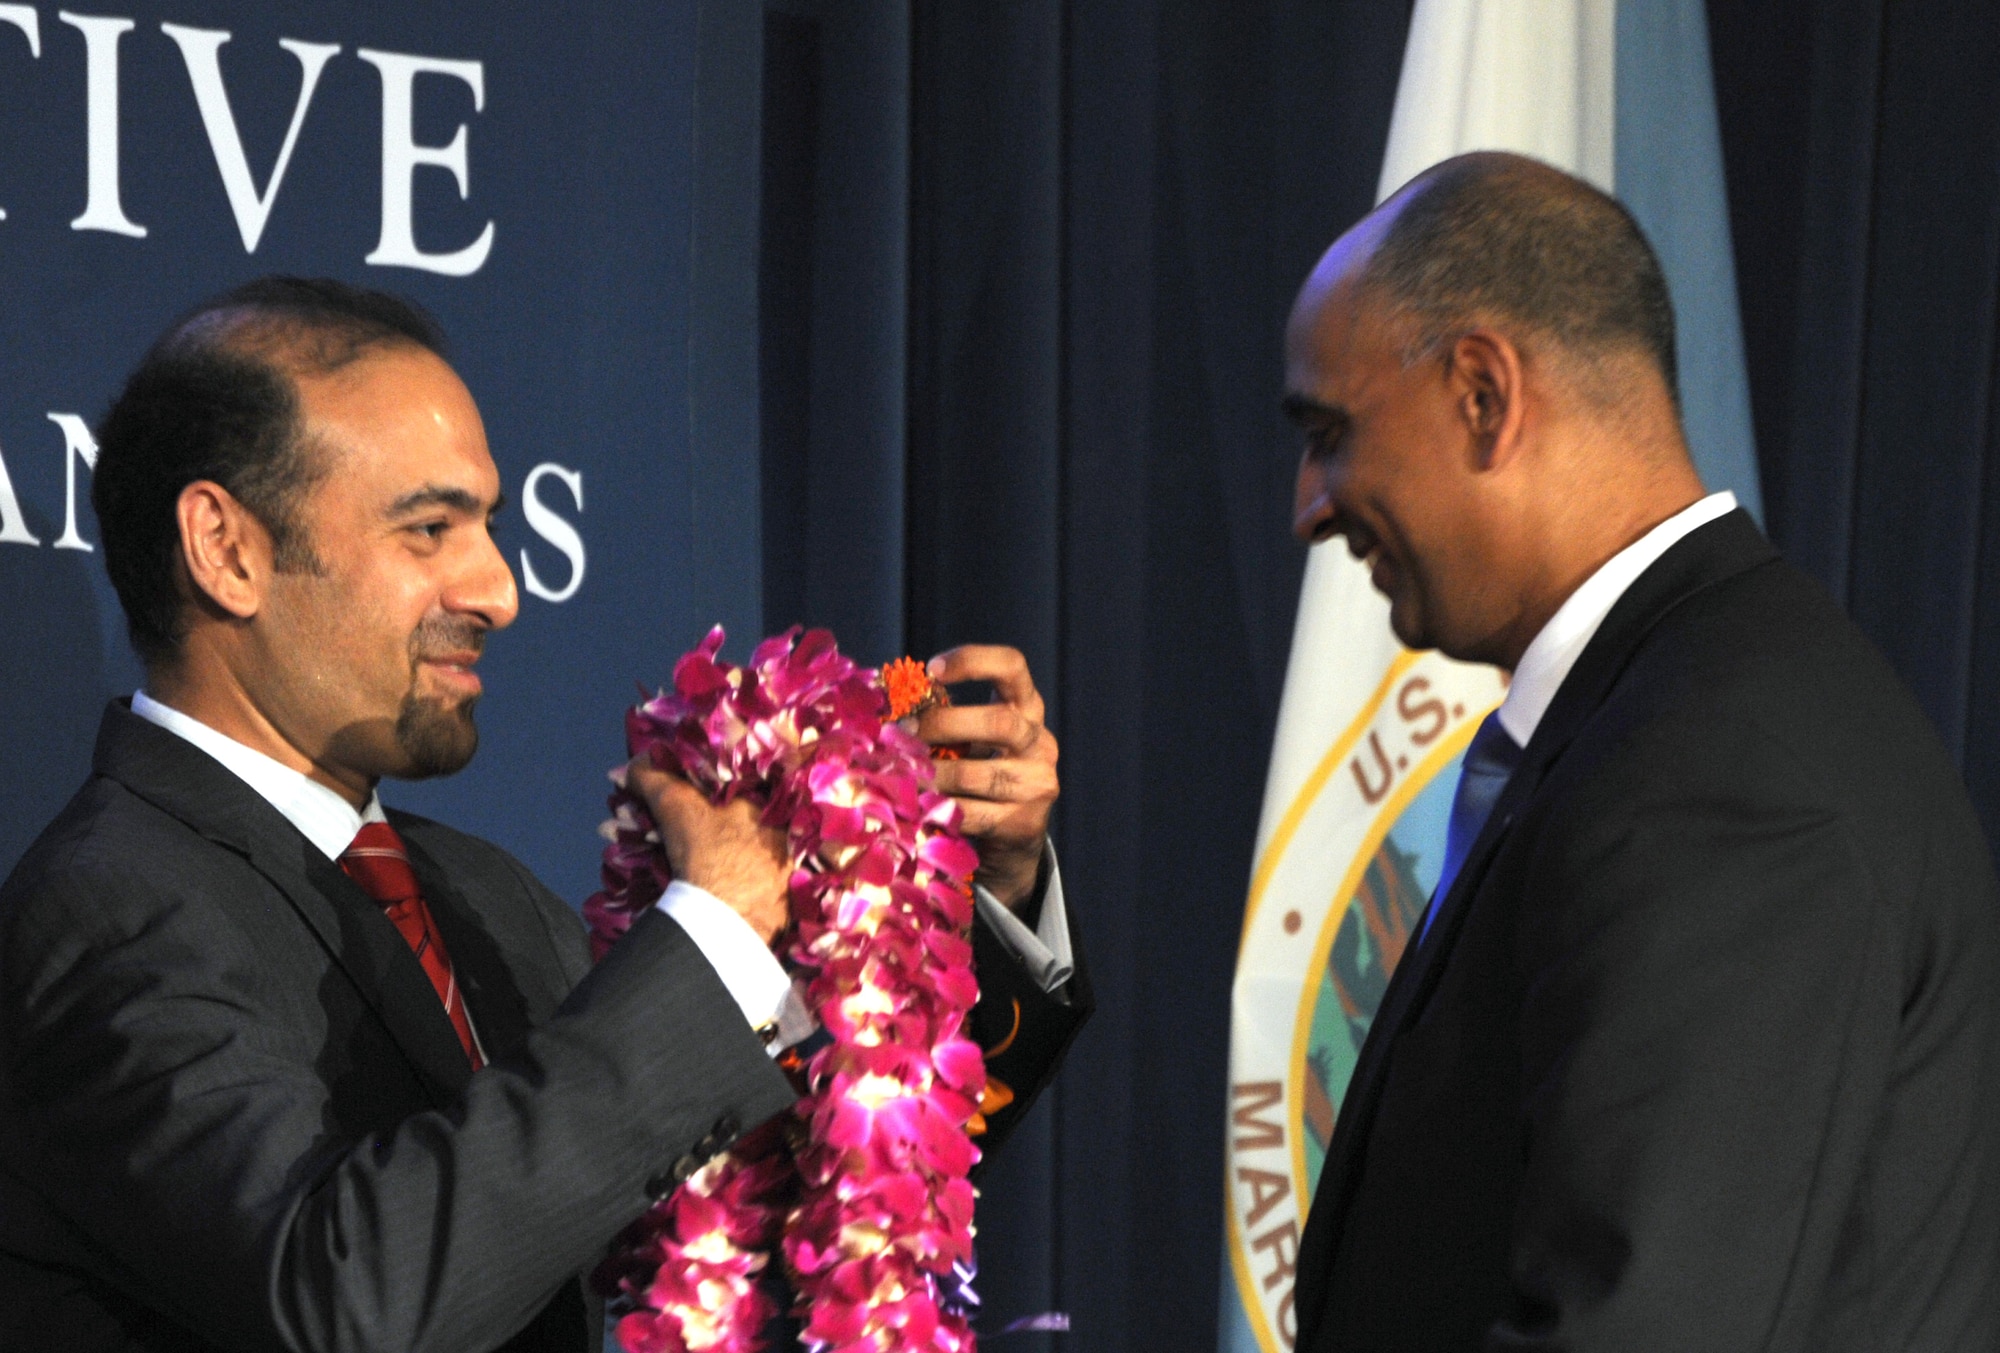 A President's Advisory Commission member presents a lei to Lt. Col. Ravi Chaudhary May 6, 2014, during the Asian American and Pacific Islanders Heritage Month Opening Ceremony in Washington, D.C. During the ceremony, Chaudhary was sworn in as a member of the President's Advisory Commission on AAPIs. As a commission member, Chaudhary is charged with working to improve the quality of life for AAPIs through increased participation in and access to federal programs. Chaudhary is an Air Force District of Washington executive officer. (U.S. Air Force photo/Master Sgt. Tammie Moore) 
 
